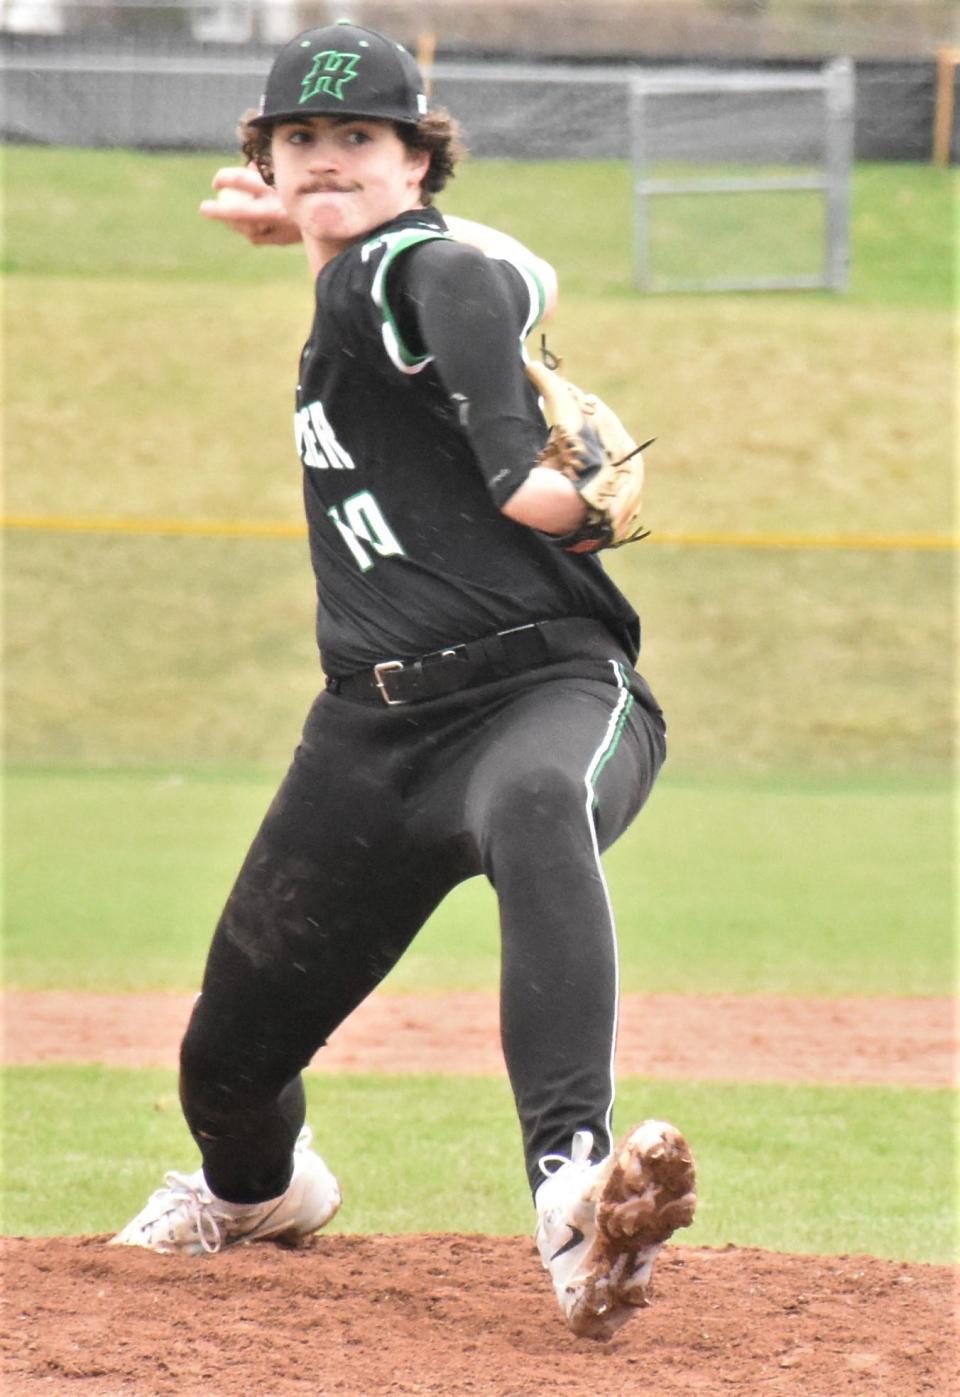 Sophomore Gavin Pizer pitched six innings in the Herkimer Magicians' 10-3 win over Little Falls Wednesday.